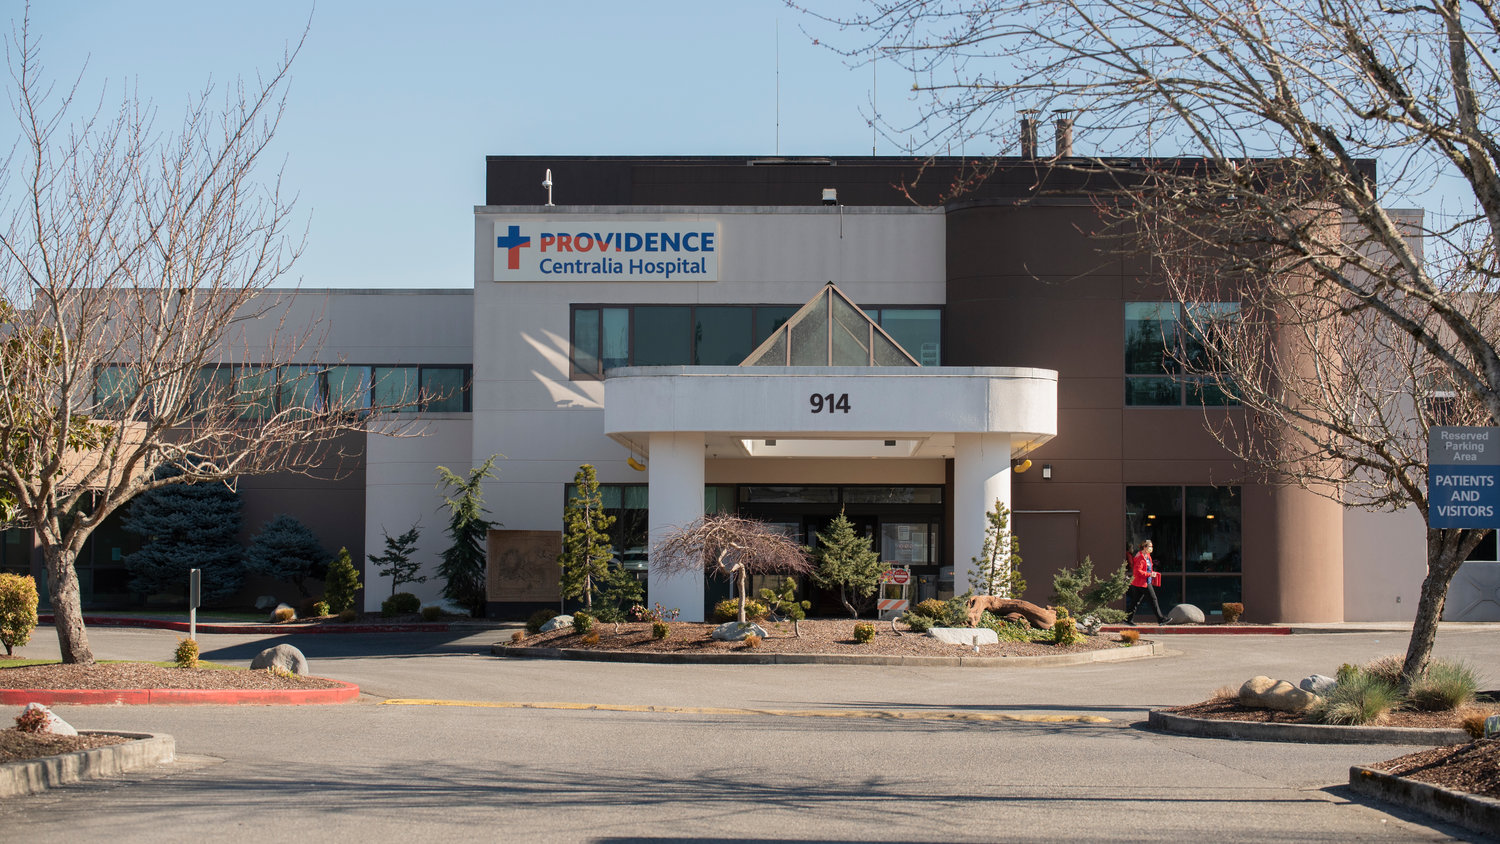 Providence Centralia Hospital is located at 914 South Scheuber Road in Centralia.